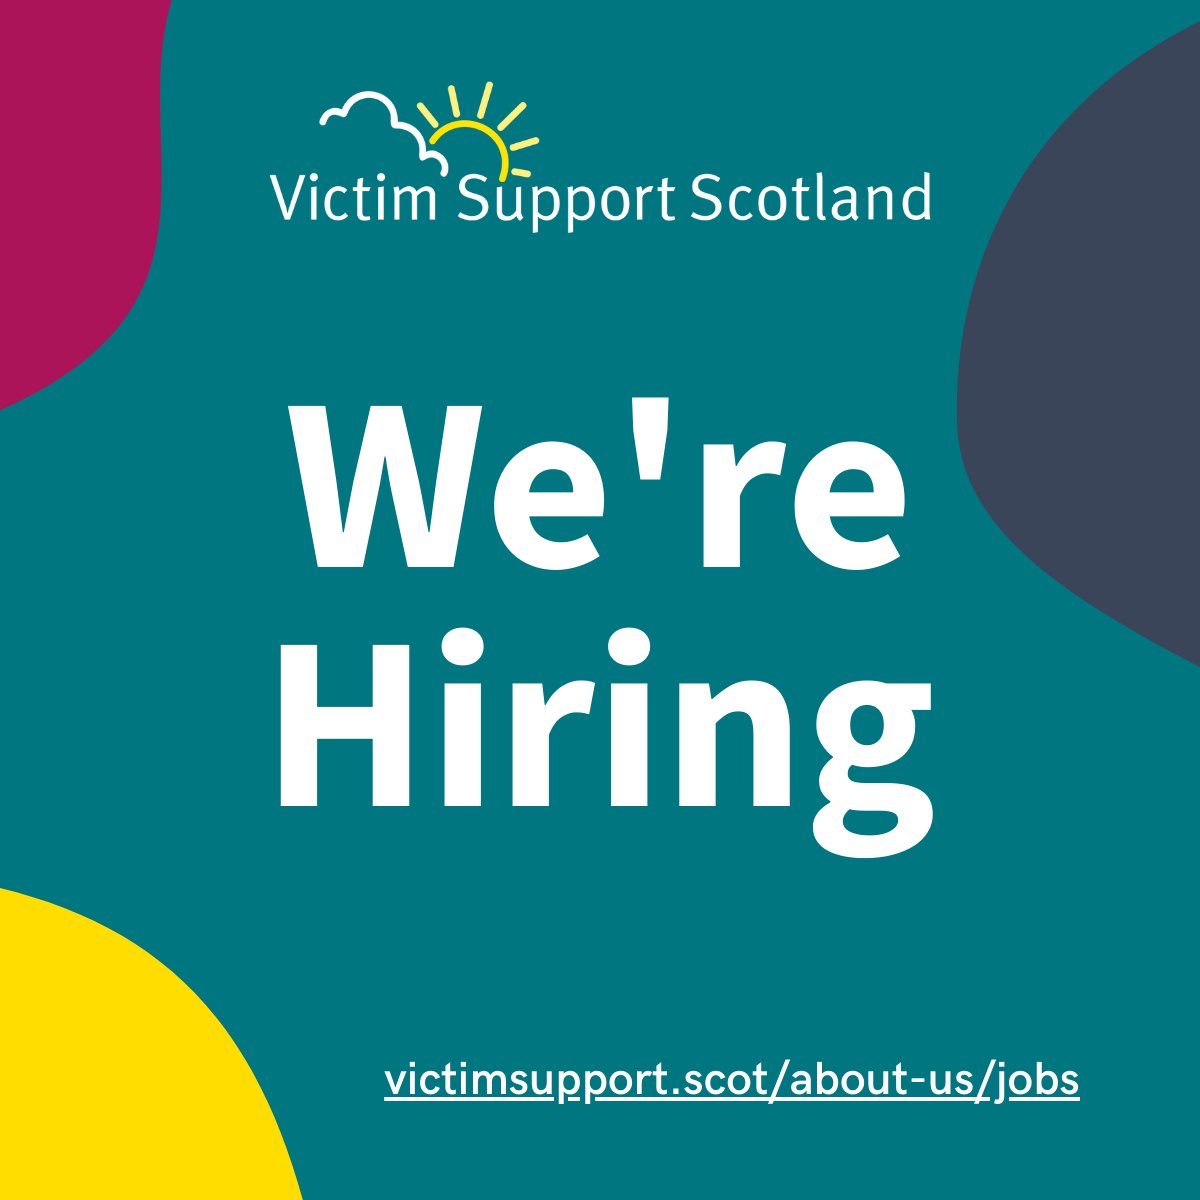 We're hiring! We currently have a range of exciting roles open - take a look: - 4 x Support Co-ordinators - Falkirk, Lerwick, Motherwell, Lanark - Accountant - Edinburgh - Locality Manager - Inverness Find out more and apply here: victimsupport.scot/about-us/jobs/